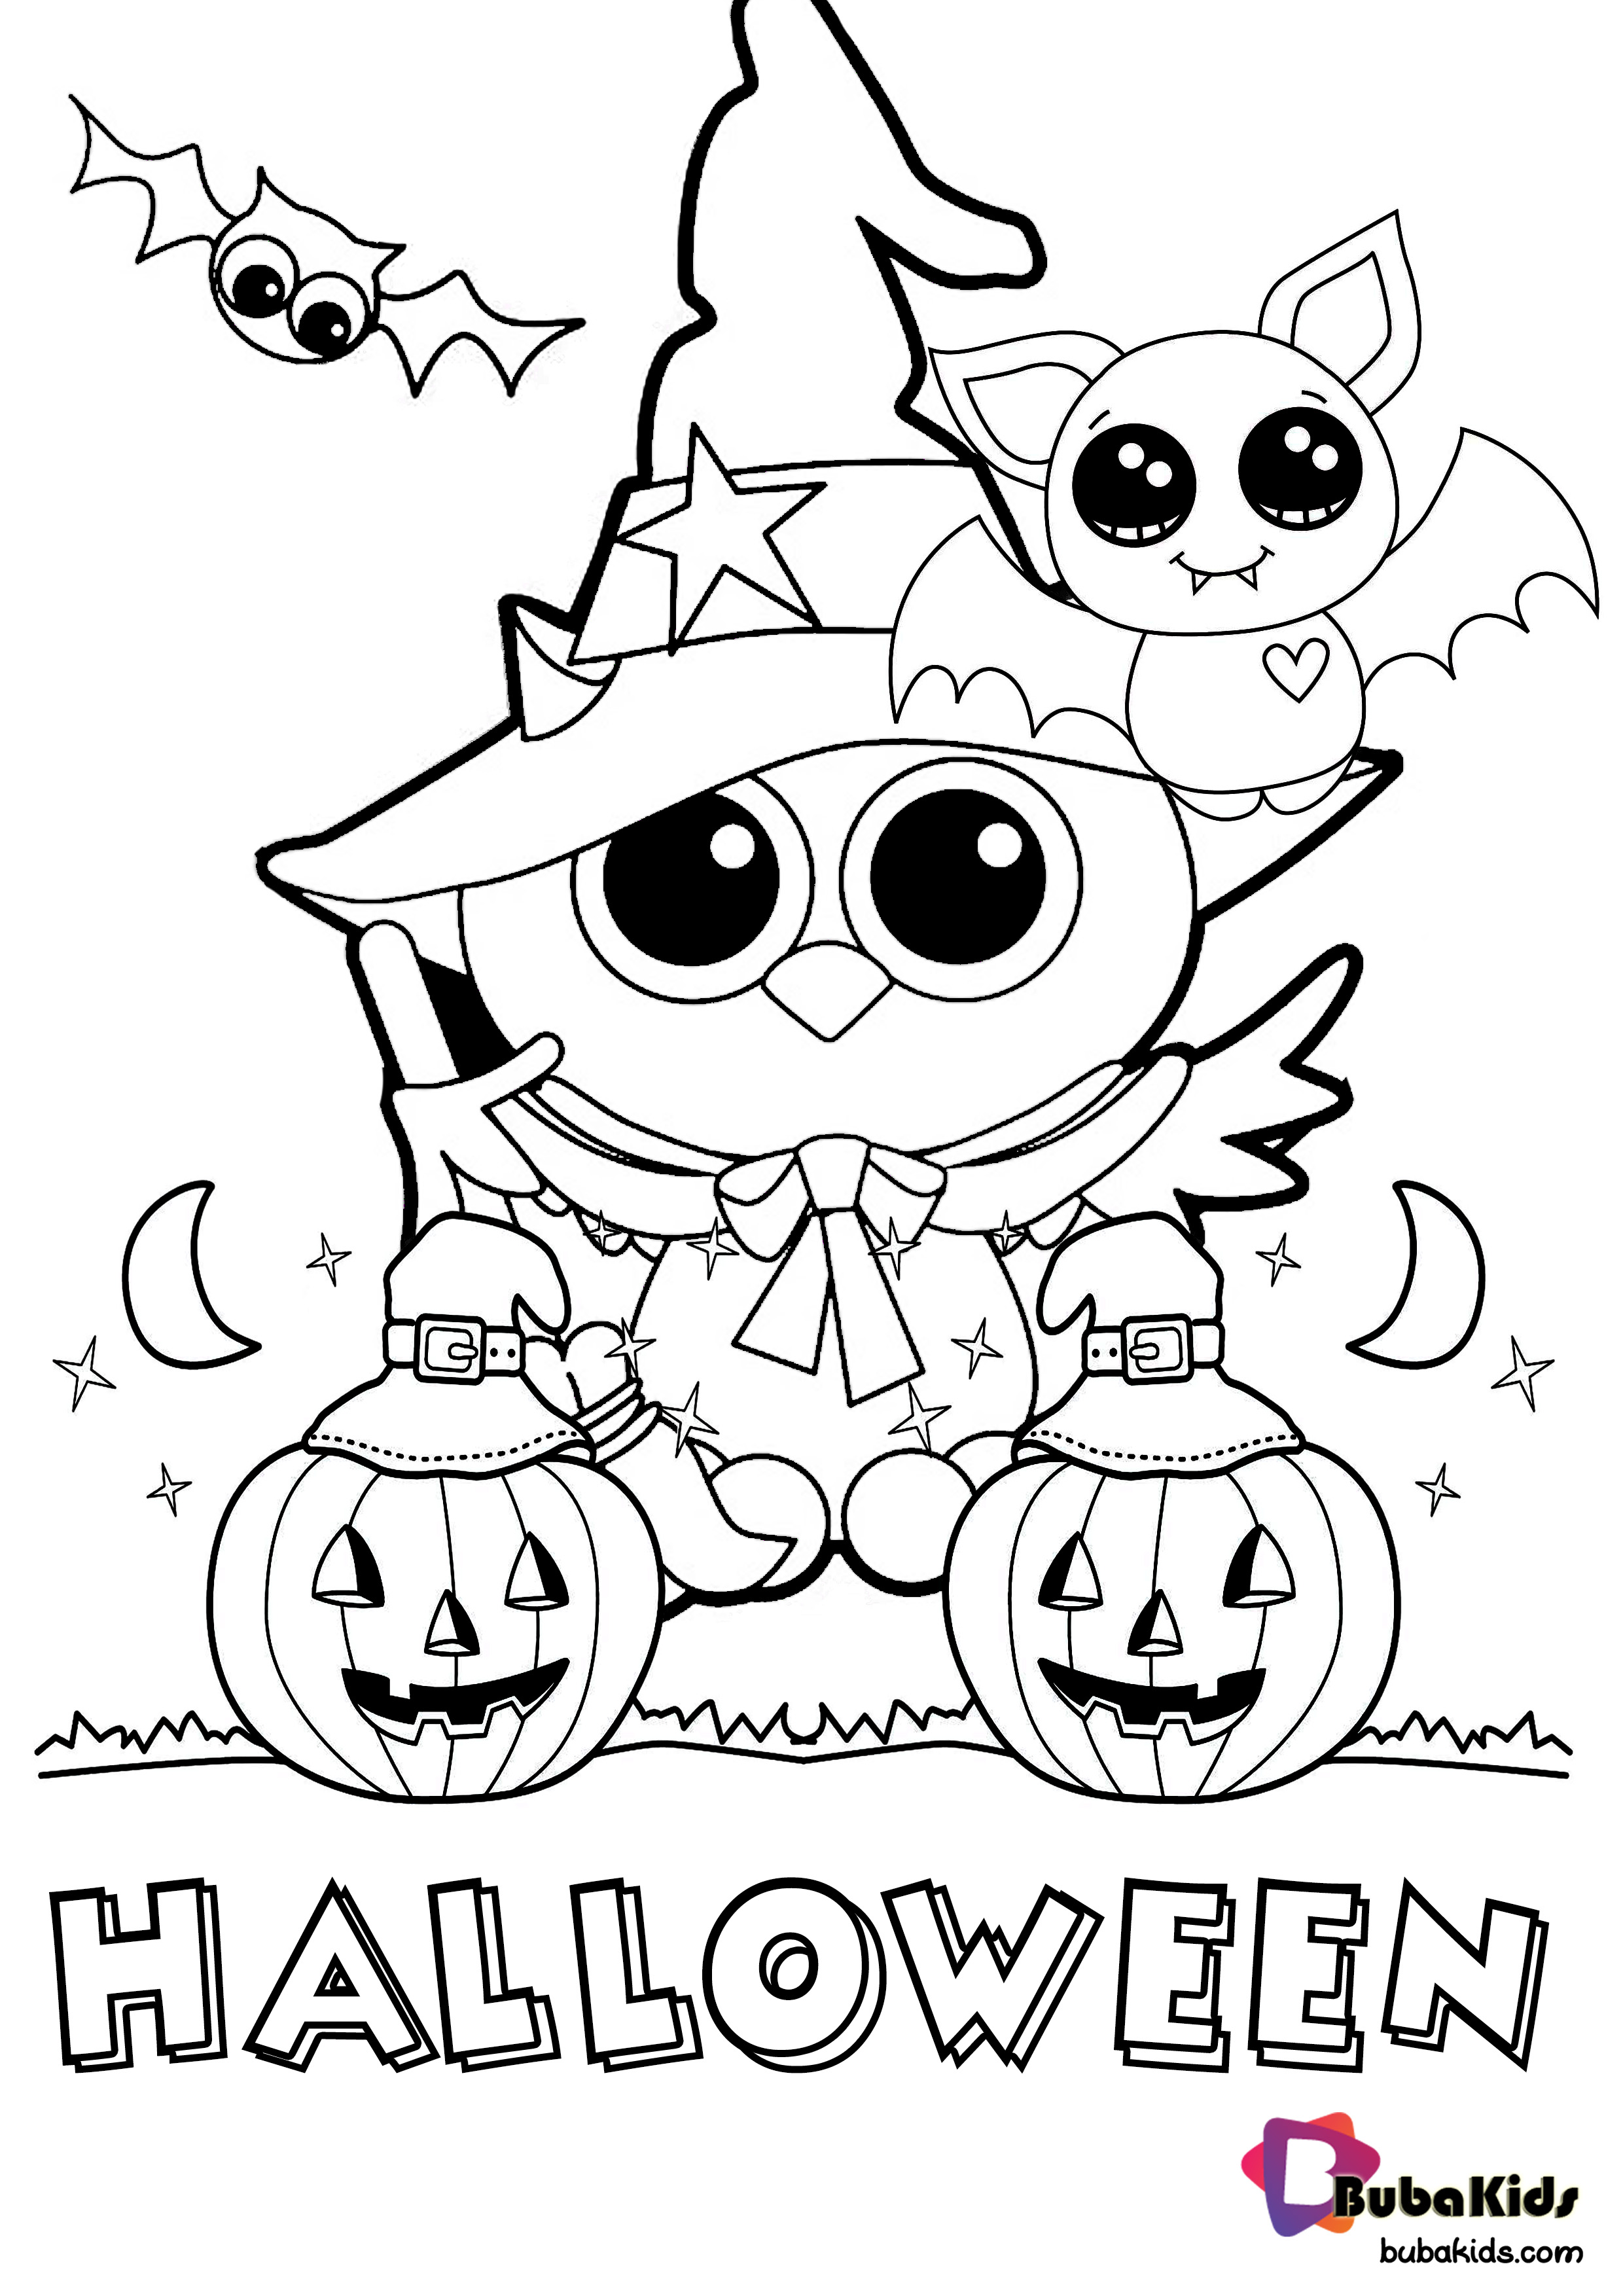 Halloween Coloring Pages Printable Free | BubaKids.com